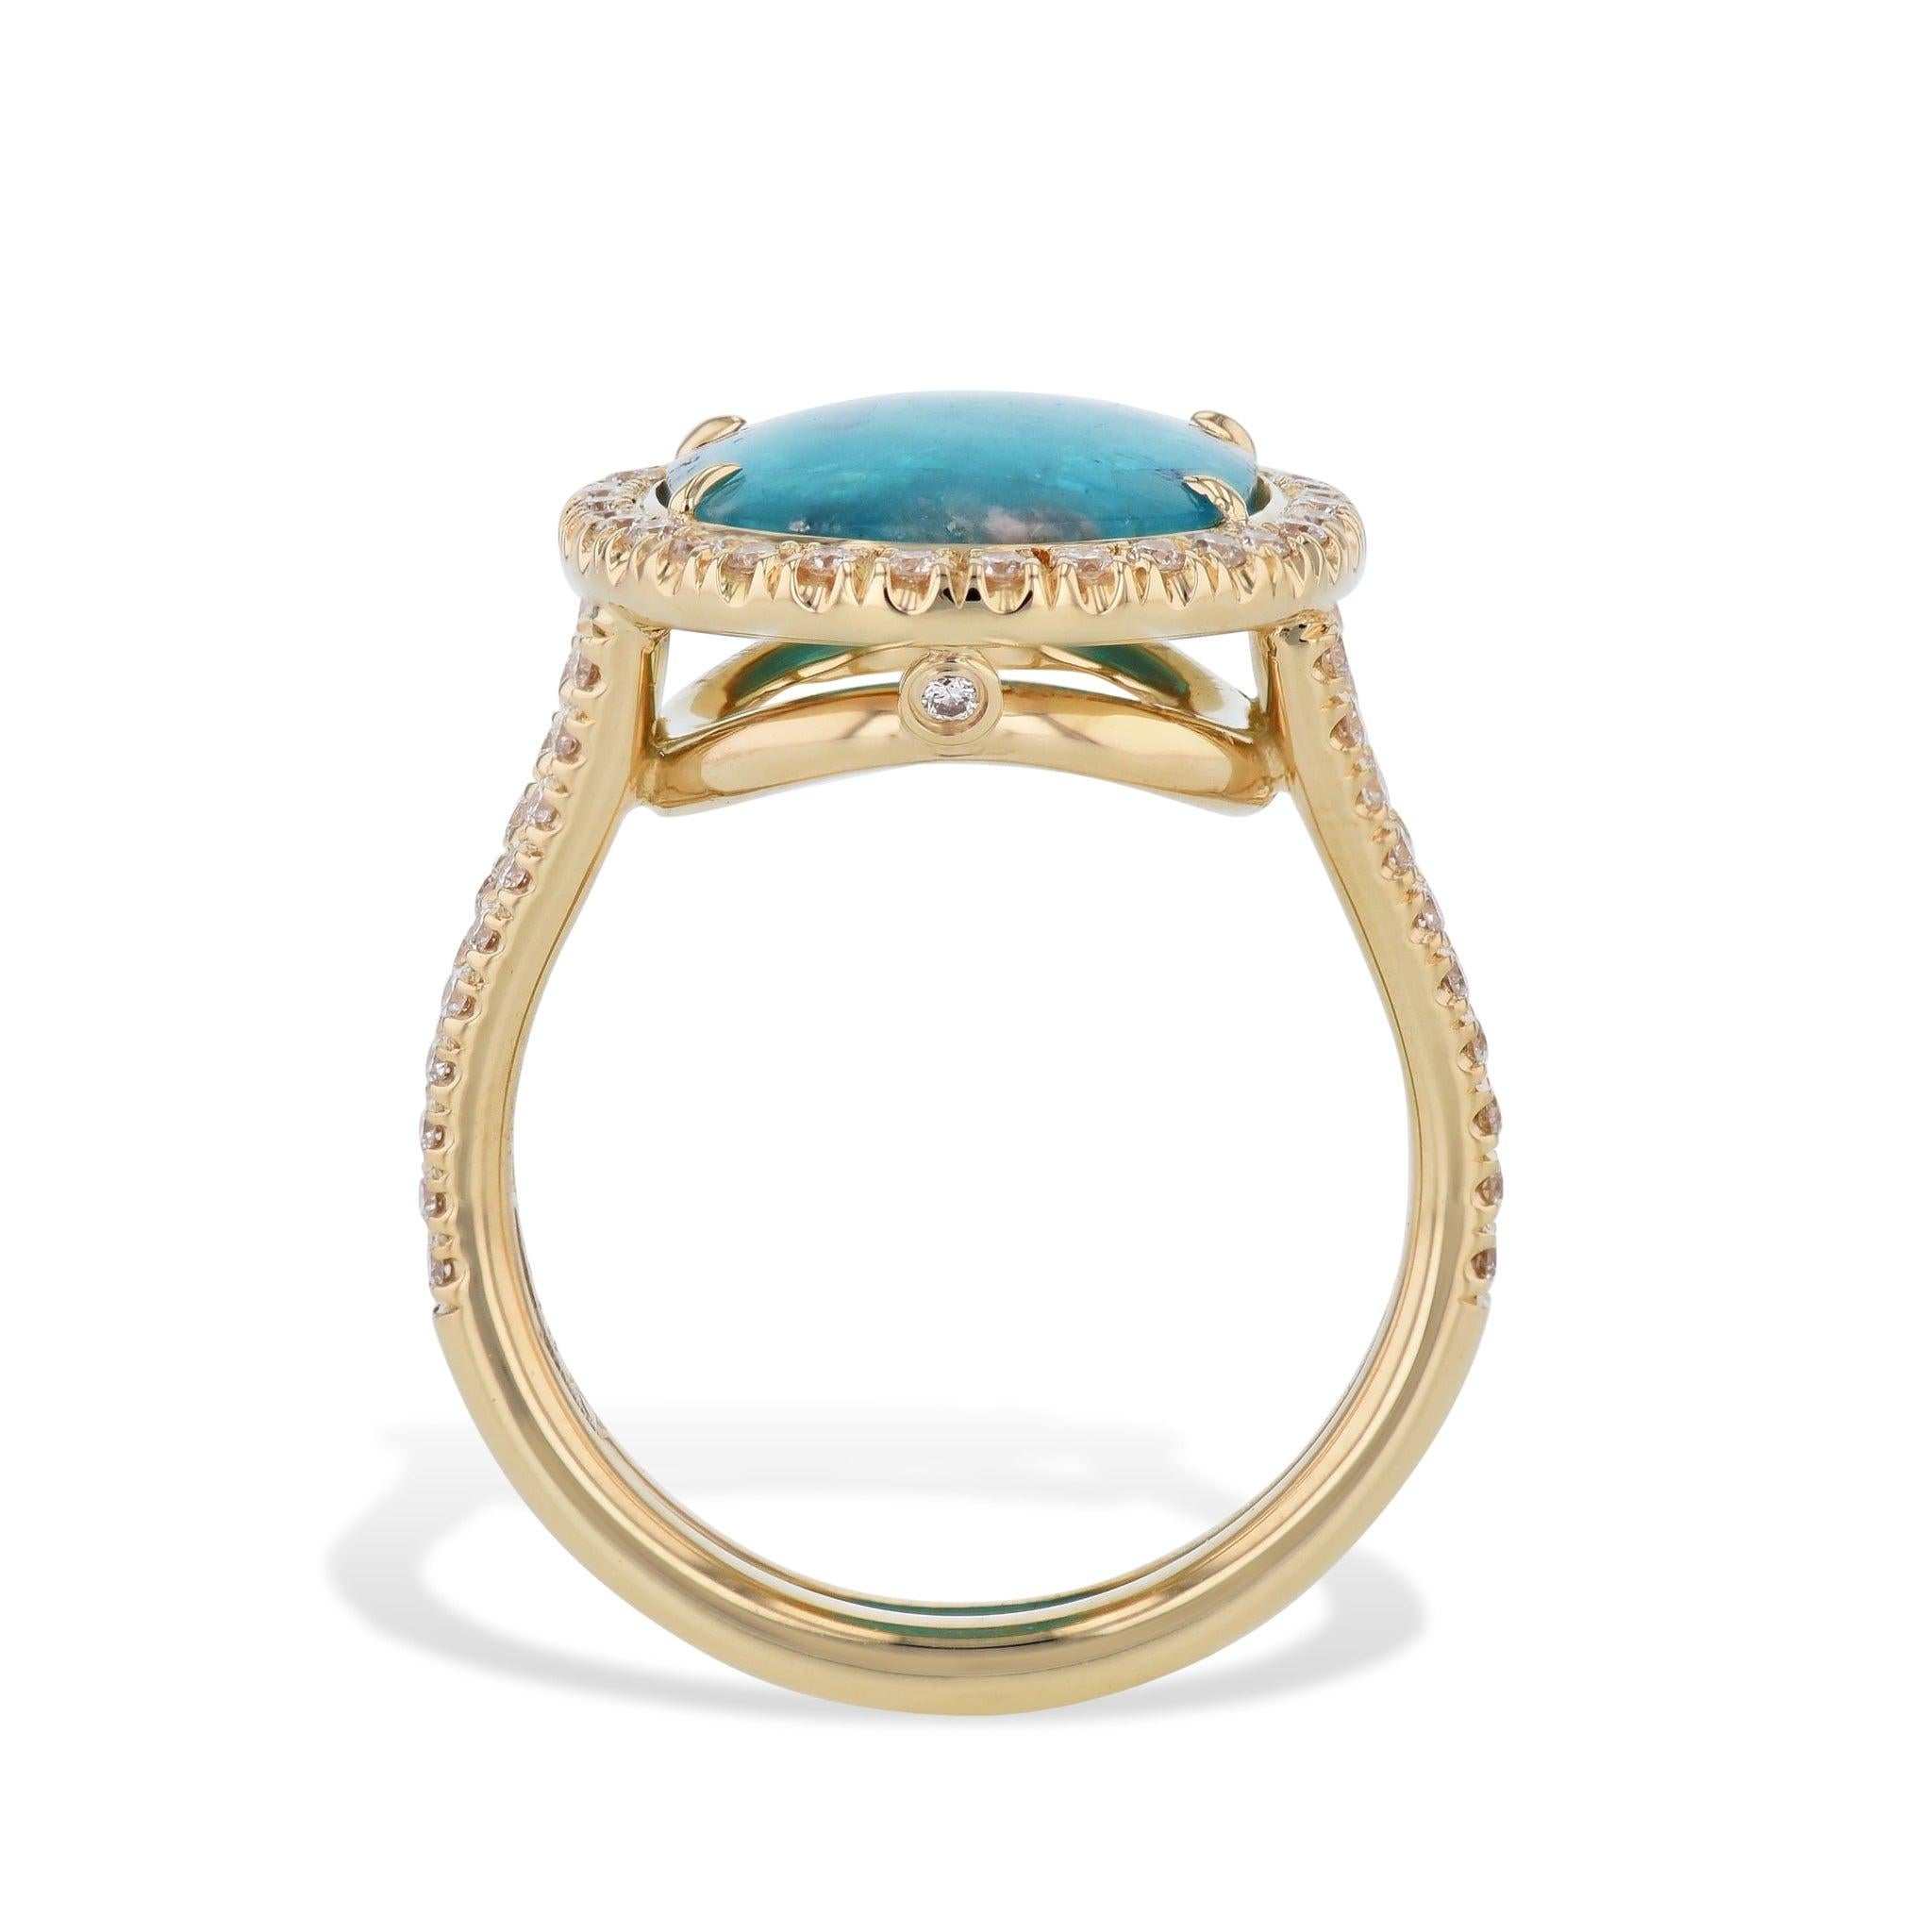 Feel inspired every time you slip on this 18kt Yellow Gold HH Collection Ring. Flaunting a gorgeous Oval Paraiba Tourmaline Cabochon, embraced in a sparkling halo of diamons, flowing along the split shank. An exquisite size 6.5 masterpiece, crafted